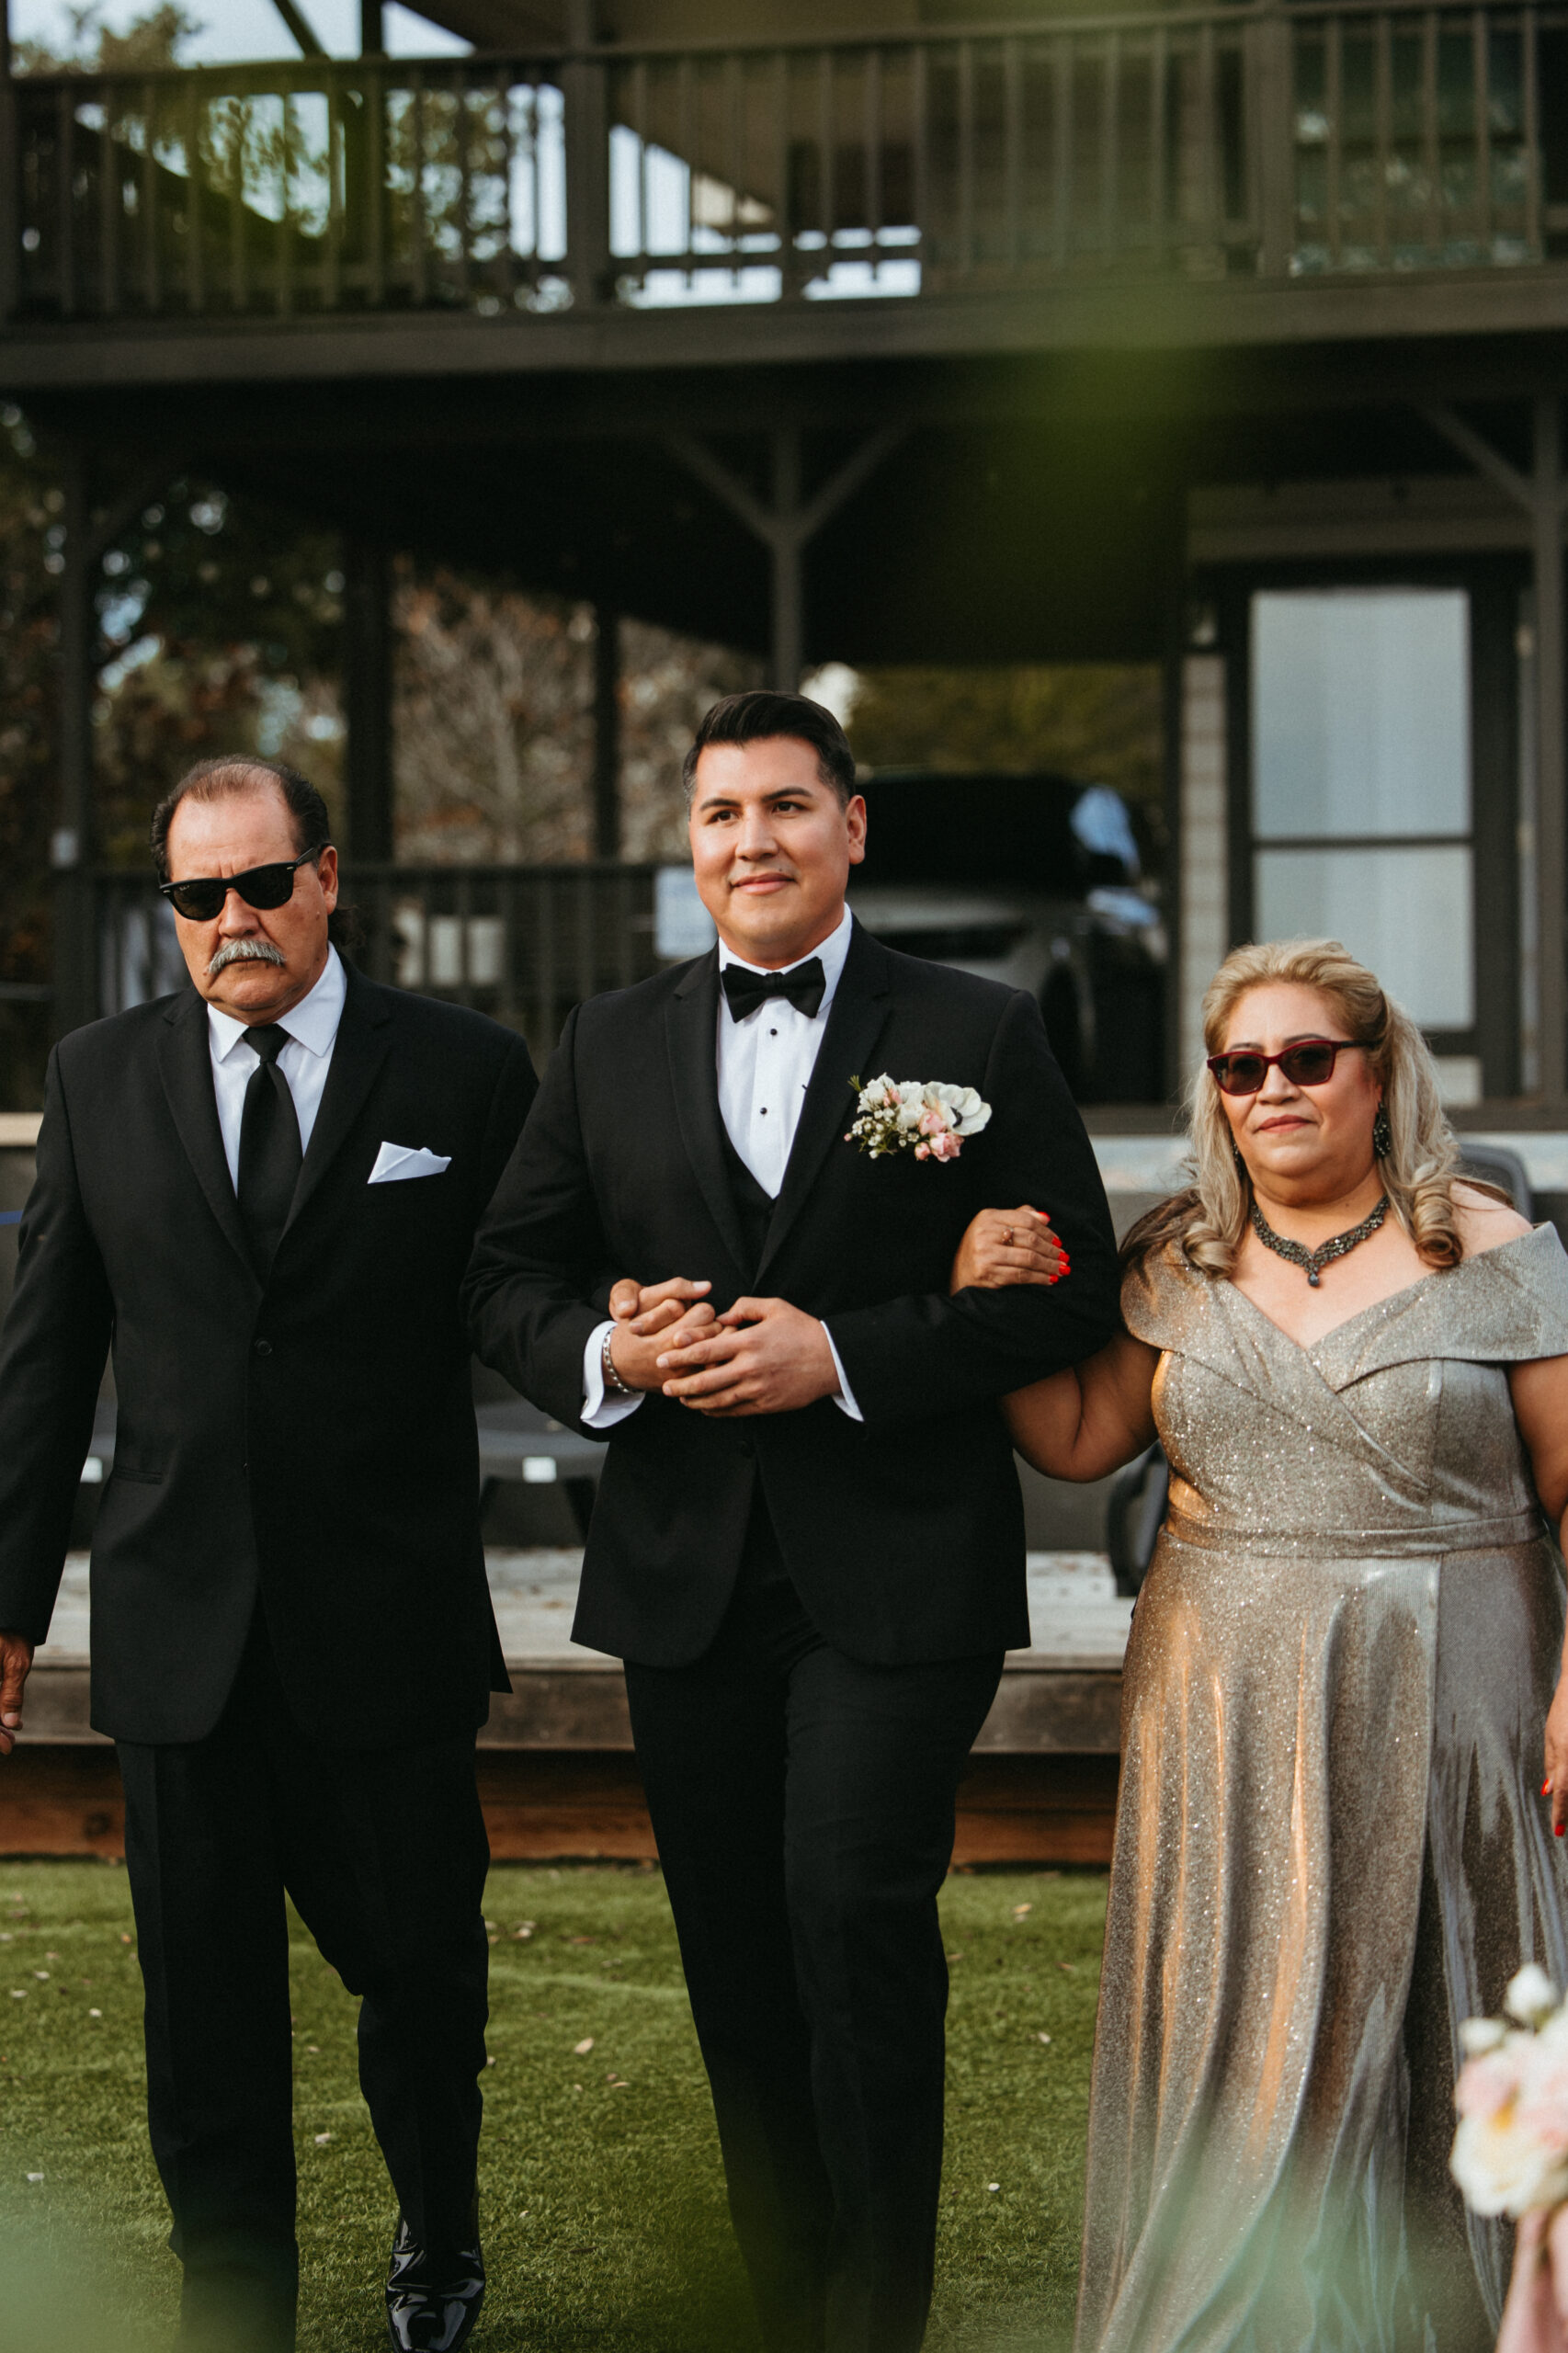 Texas Hill Country Wedding